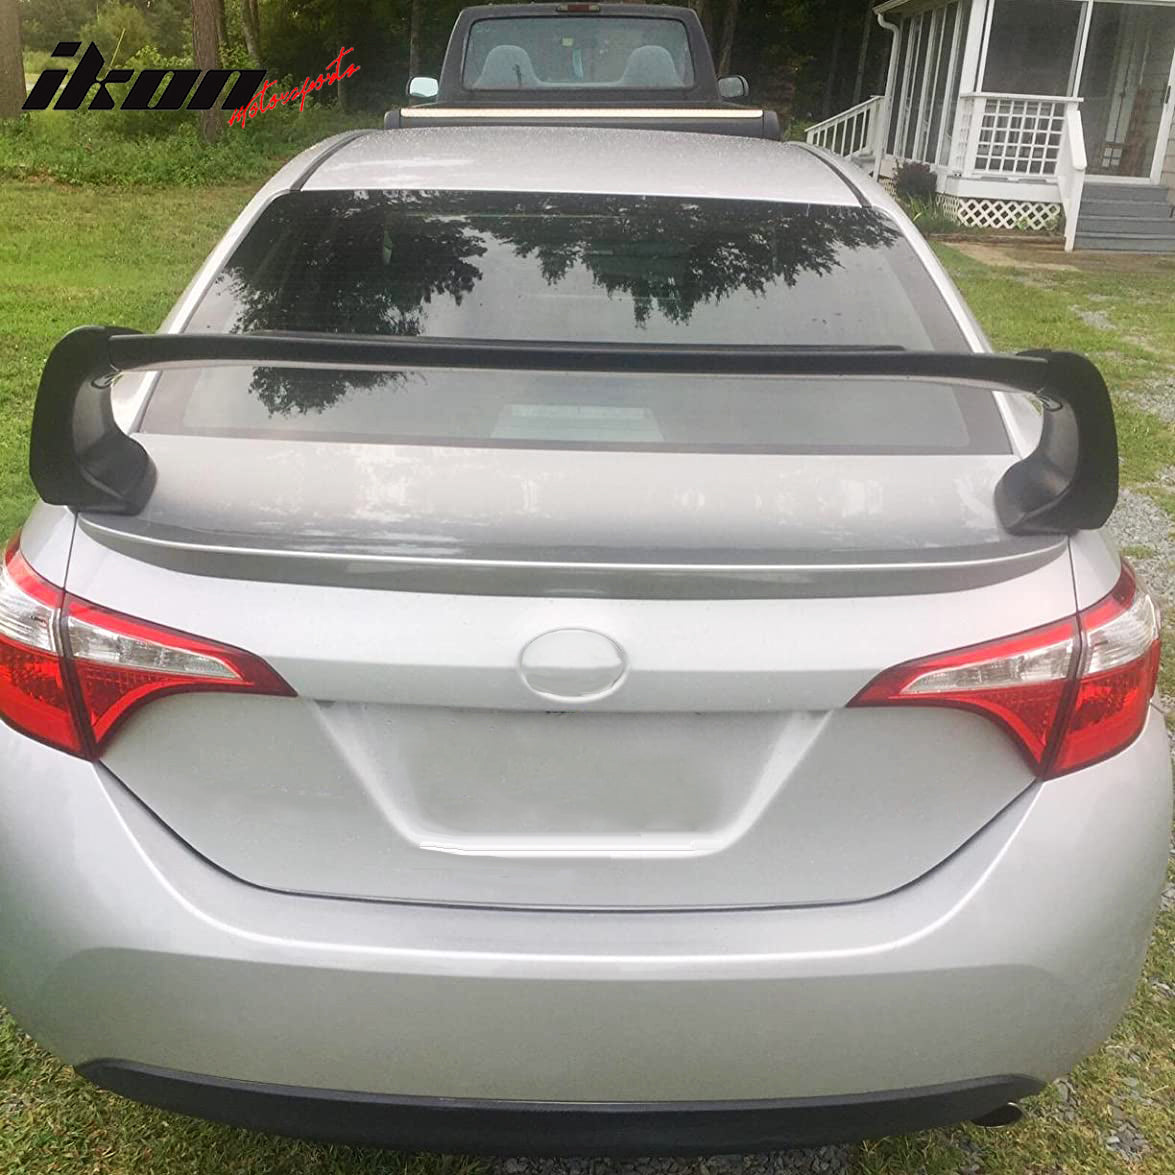 IKON MOTORSPORTS Pre-painted Trunk Spoiler, Compatible With 2014-2021 Toyota Corolla Sedan, ABS Painted Matte Black Trunk Boot Lip Spoiler Wing Deck Lid Other Color Available